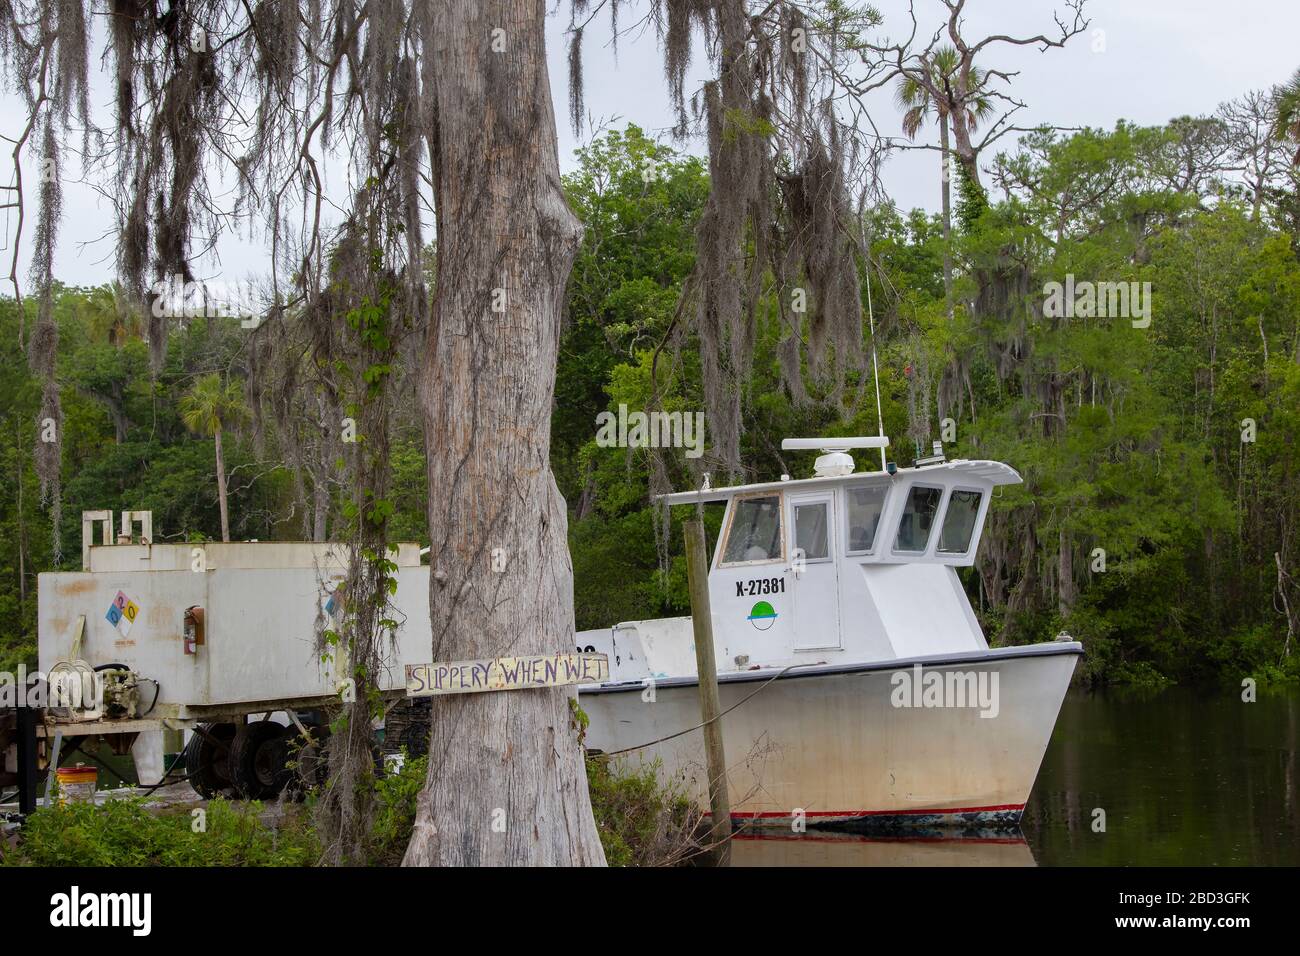 A vintage commercial fishing boat on the Withlacoochee River at